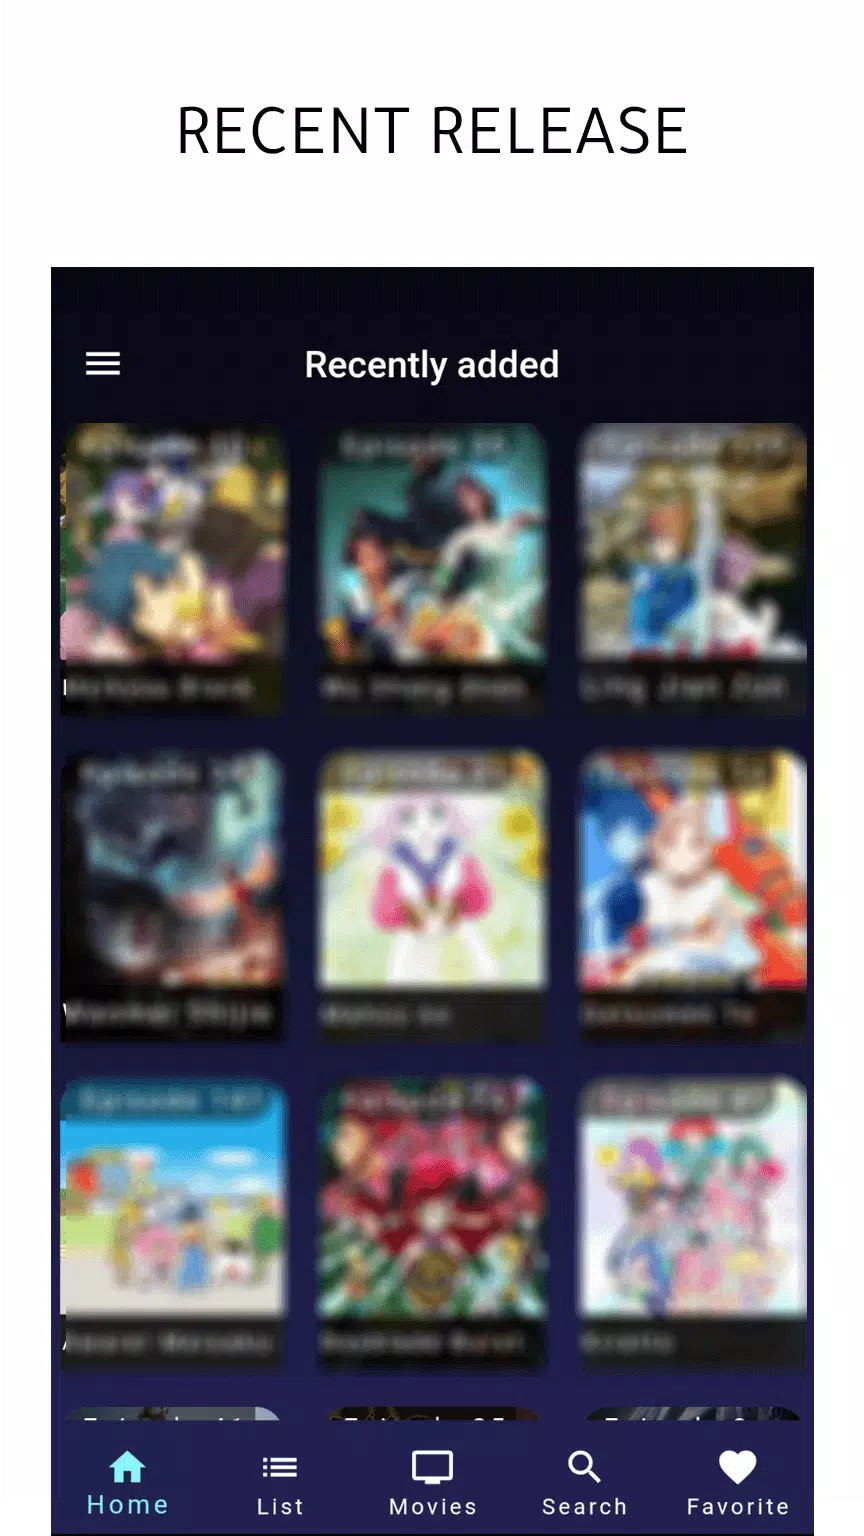 Anime Online APK (Android App) - Free Download